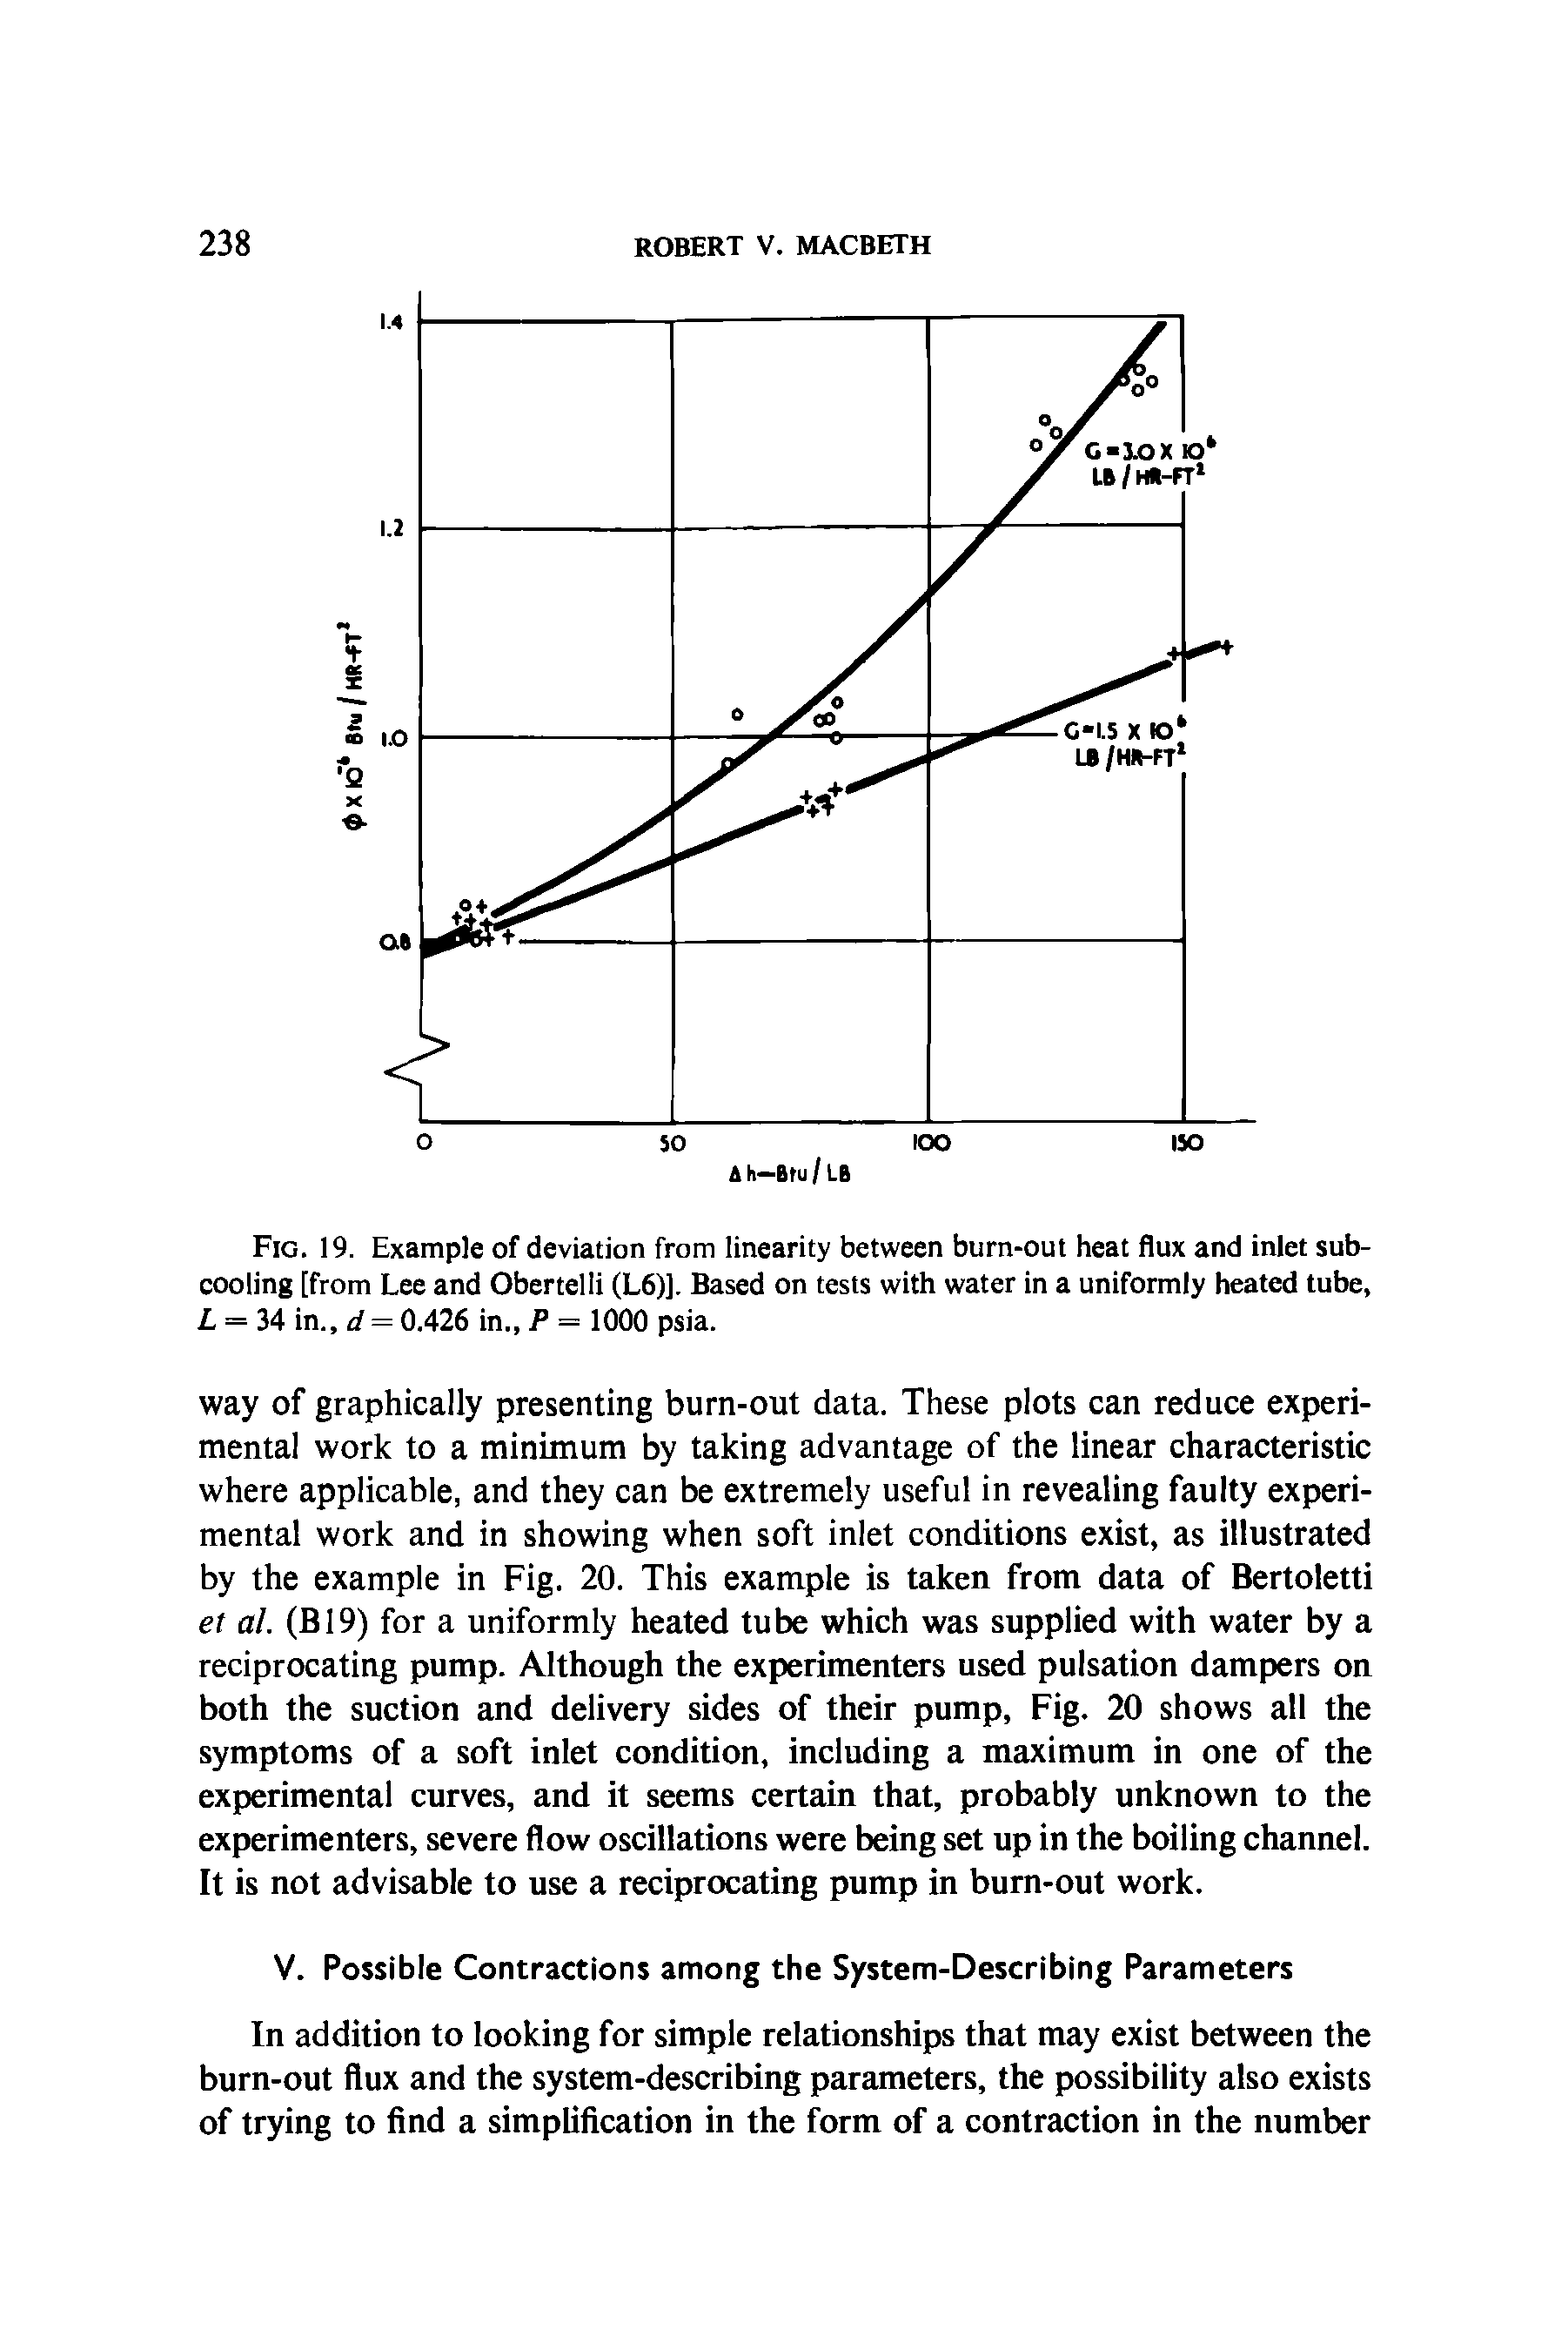 Fig. 19. Example of deviation from linearity between burn-out heat flux and inlet subcooling [from Lee and Obertelli (L6)]. Based on tests with water in a uniformly heated tube, L = 34 in., d = 0.426 in., P = 1000 psia.